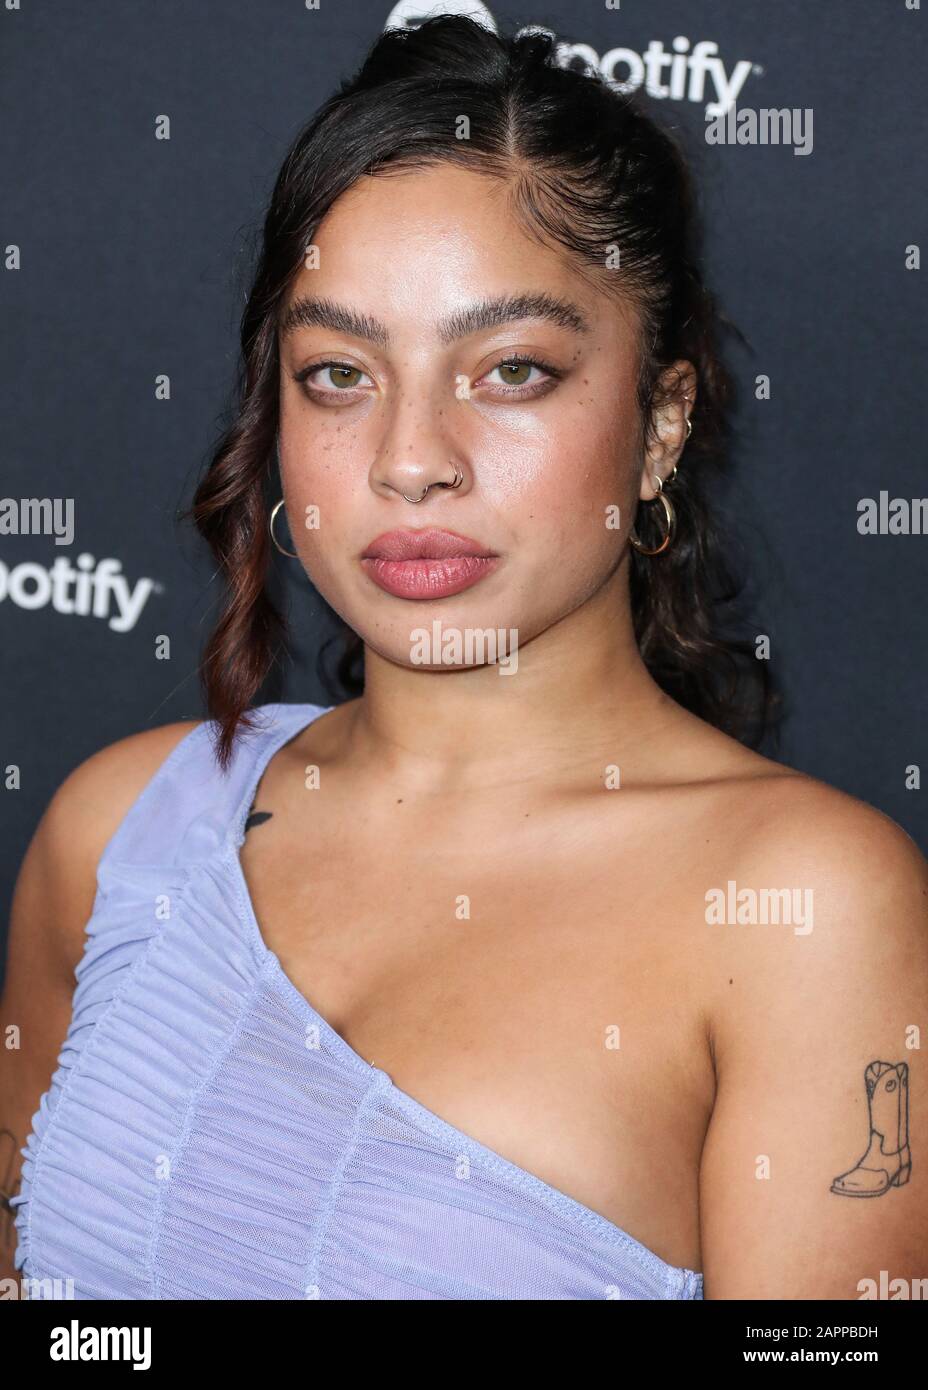 WEST HOLLYWOOD, LOS ANGELES, CALIFORNIA, USA - JANUARY 23: Kiana Lede  arrives at the Spotify Best New Artist 2020 Party held at The Lot Studios  on January 23, 2020 in West Hollywood,